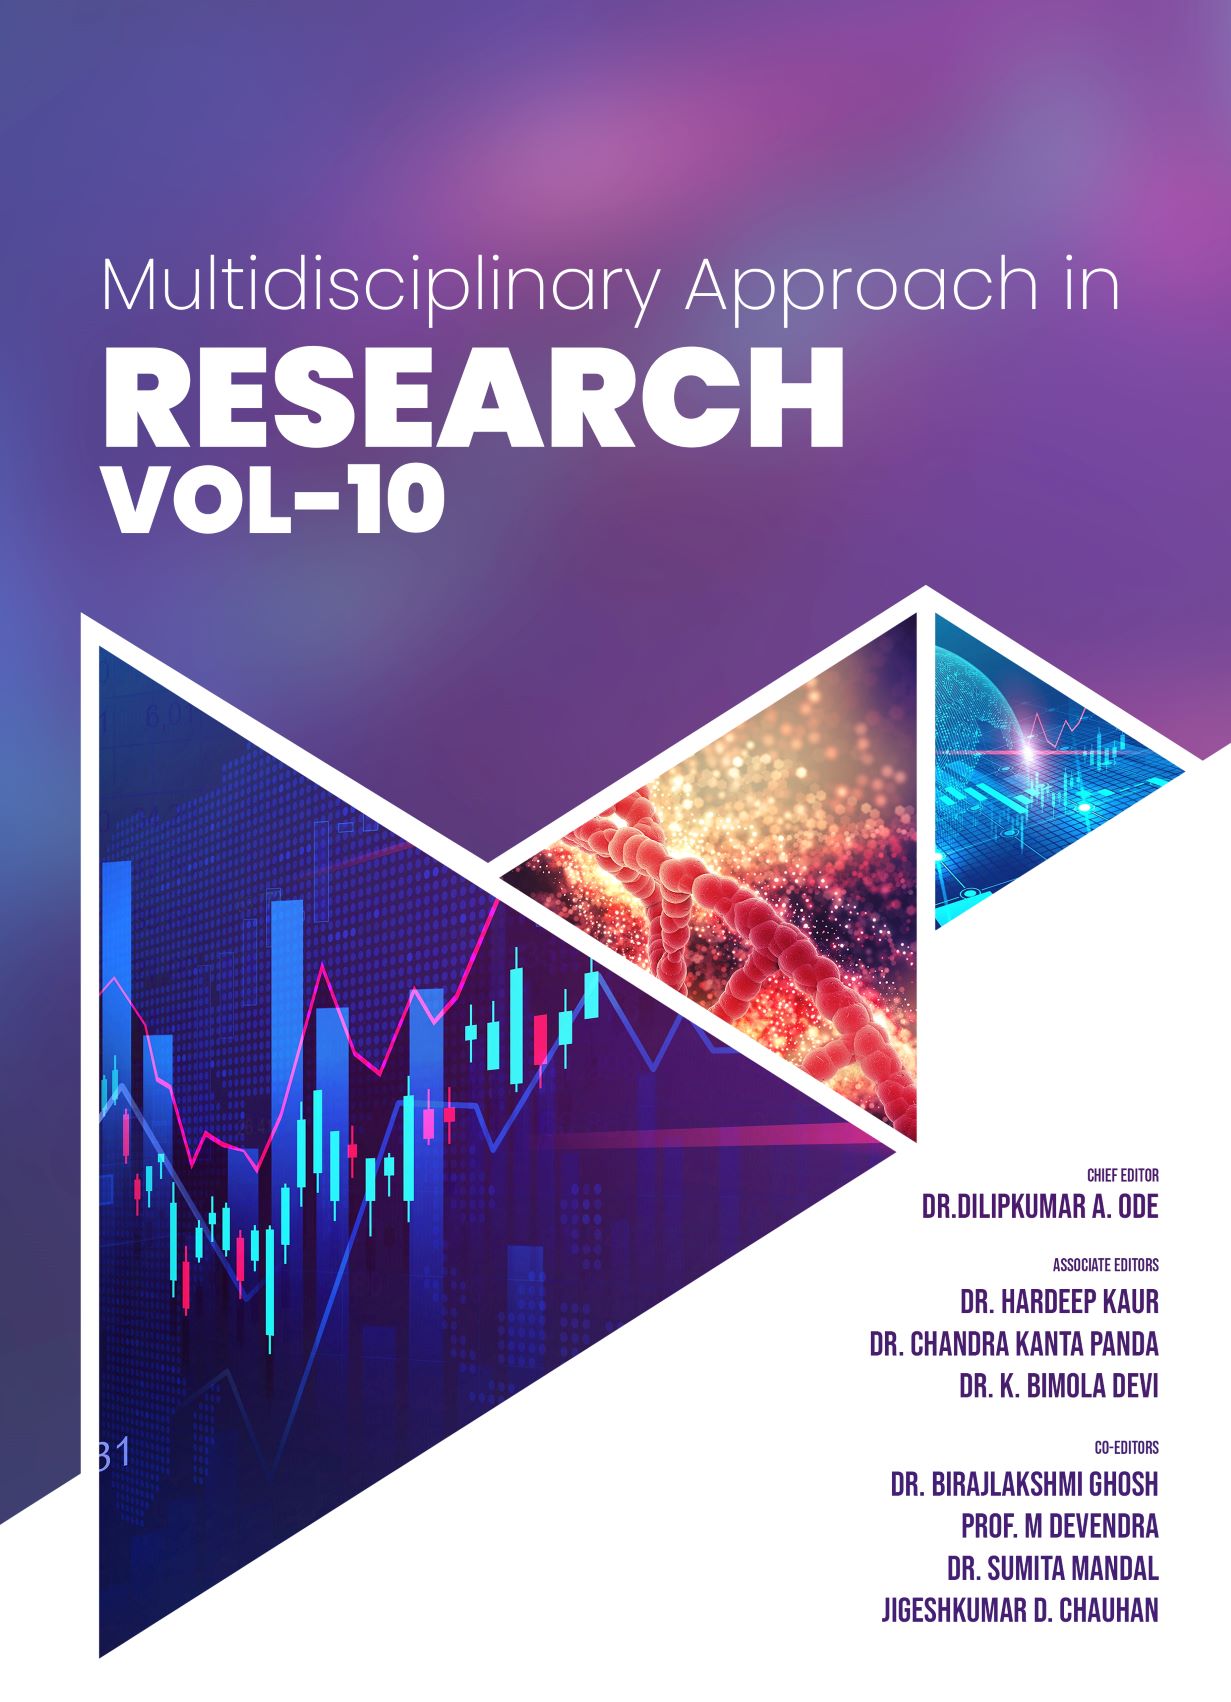 Multidisciplinary Approach in Research